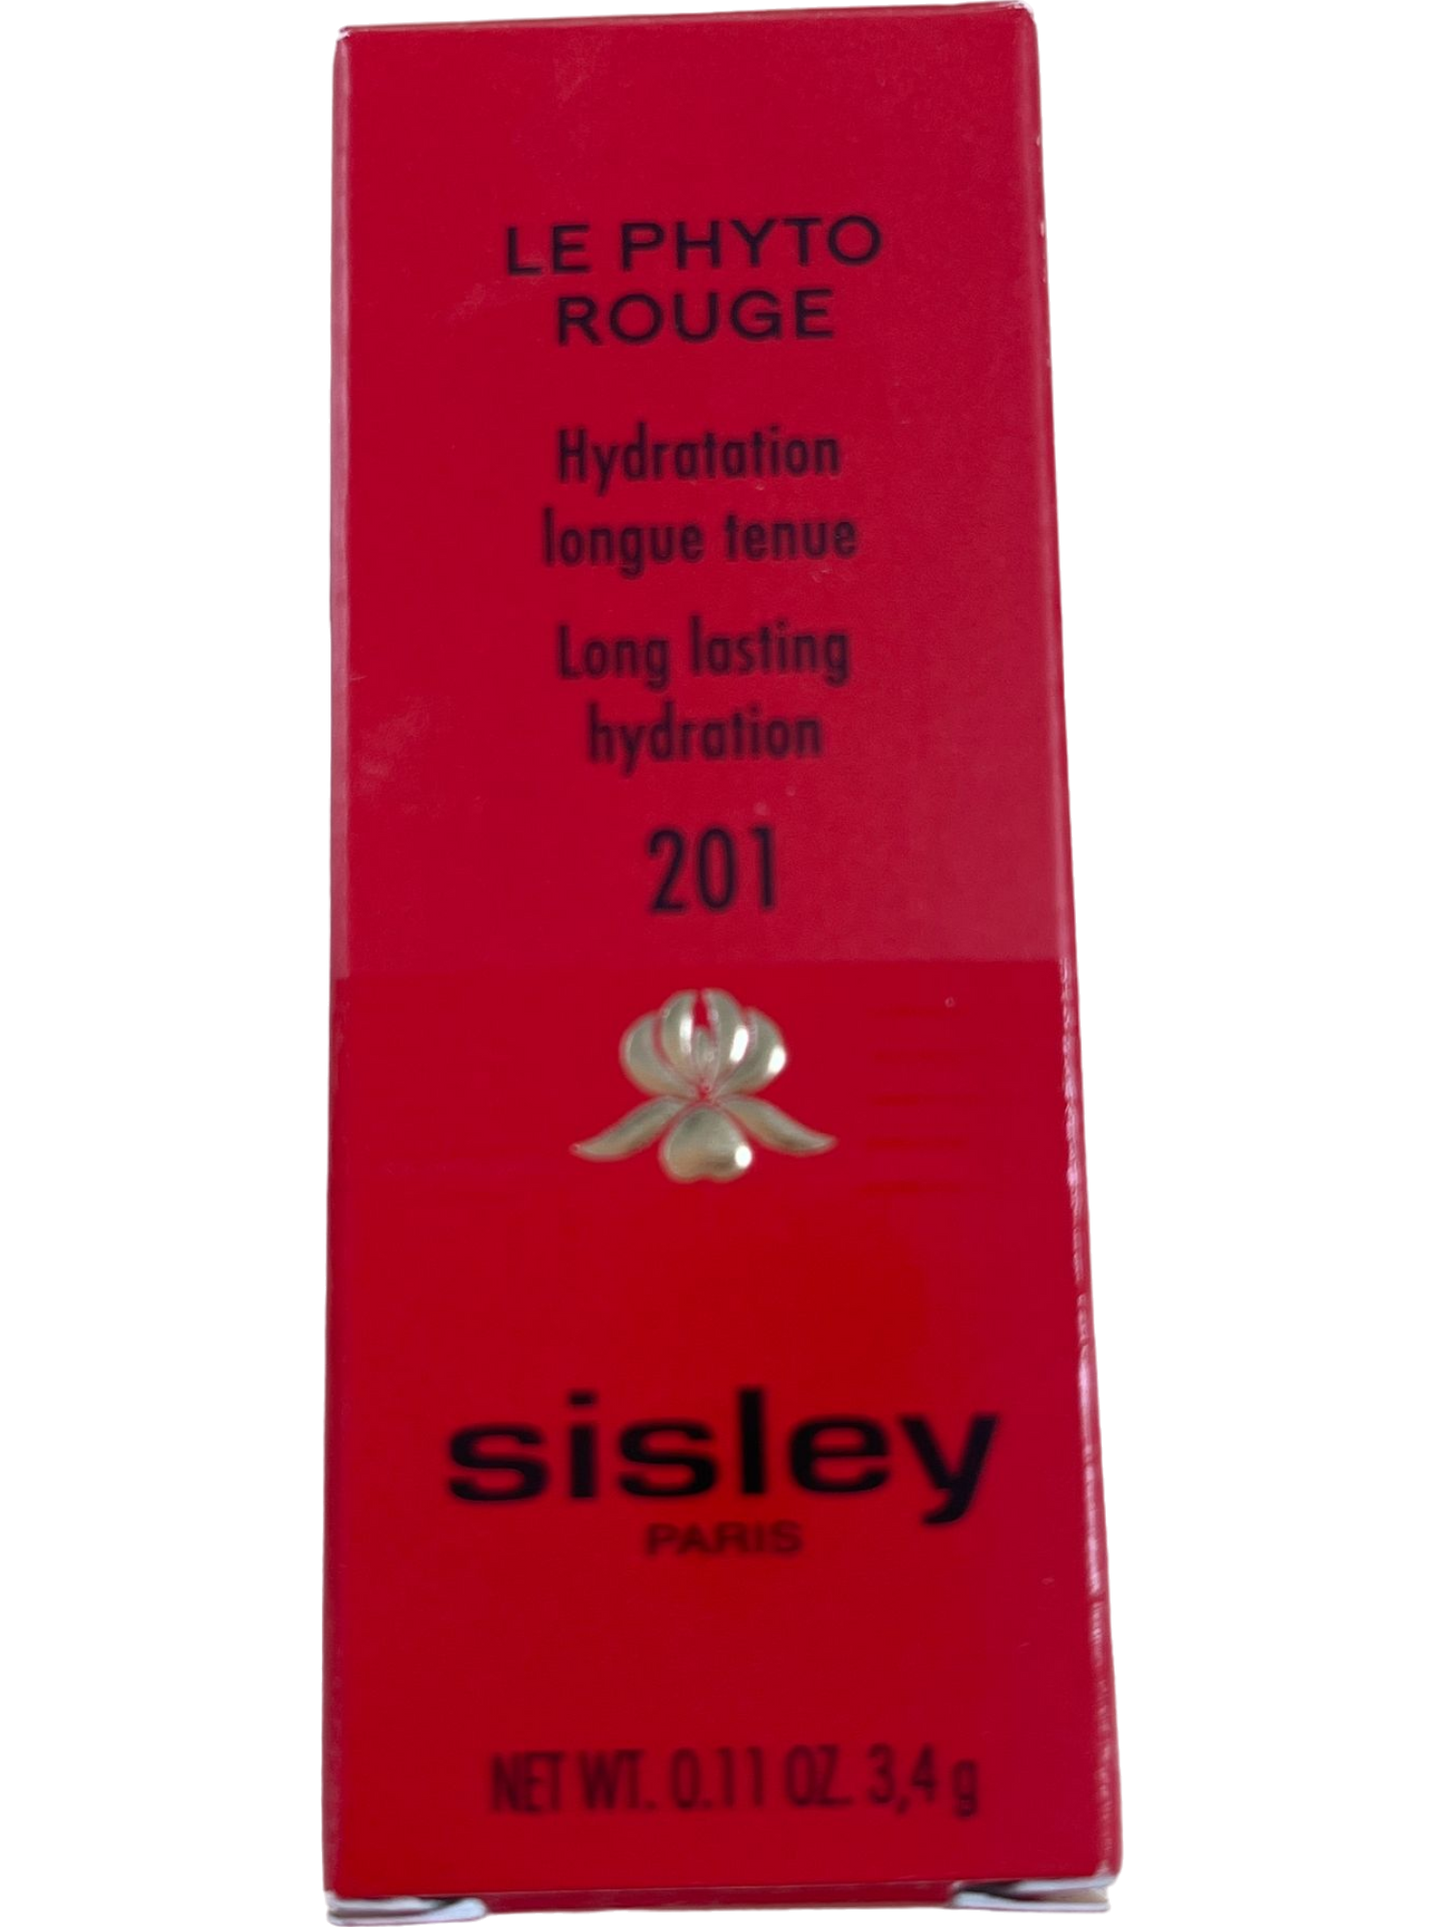 Sisley Paris Red LE PHYTO ROUGE Lipstick